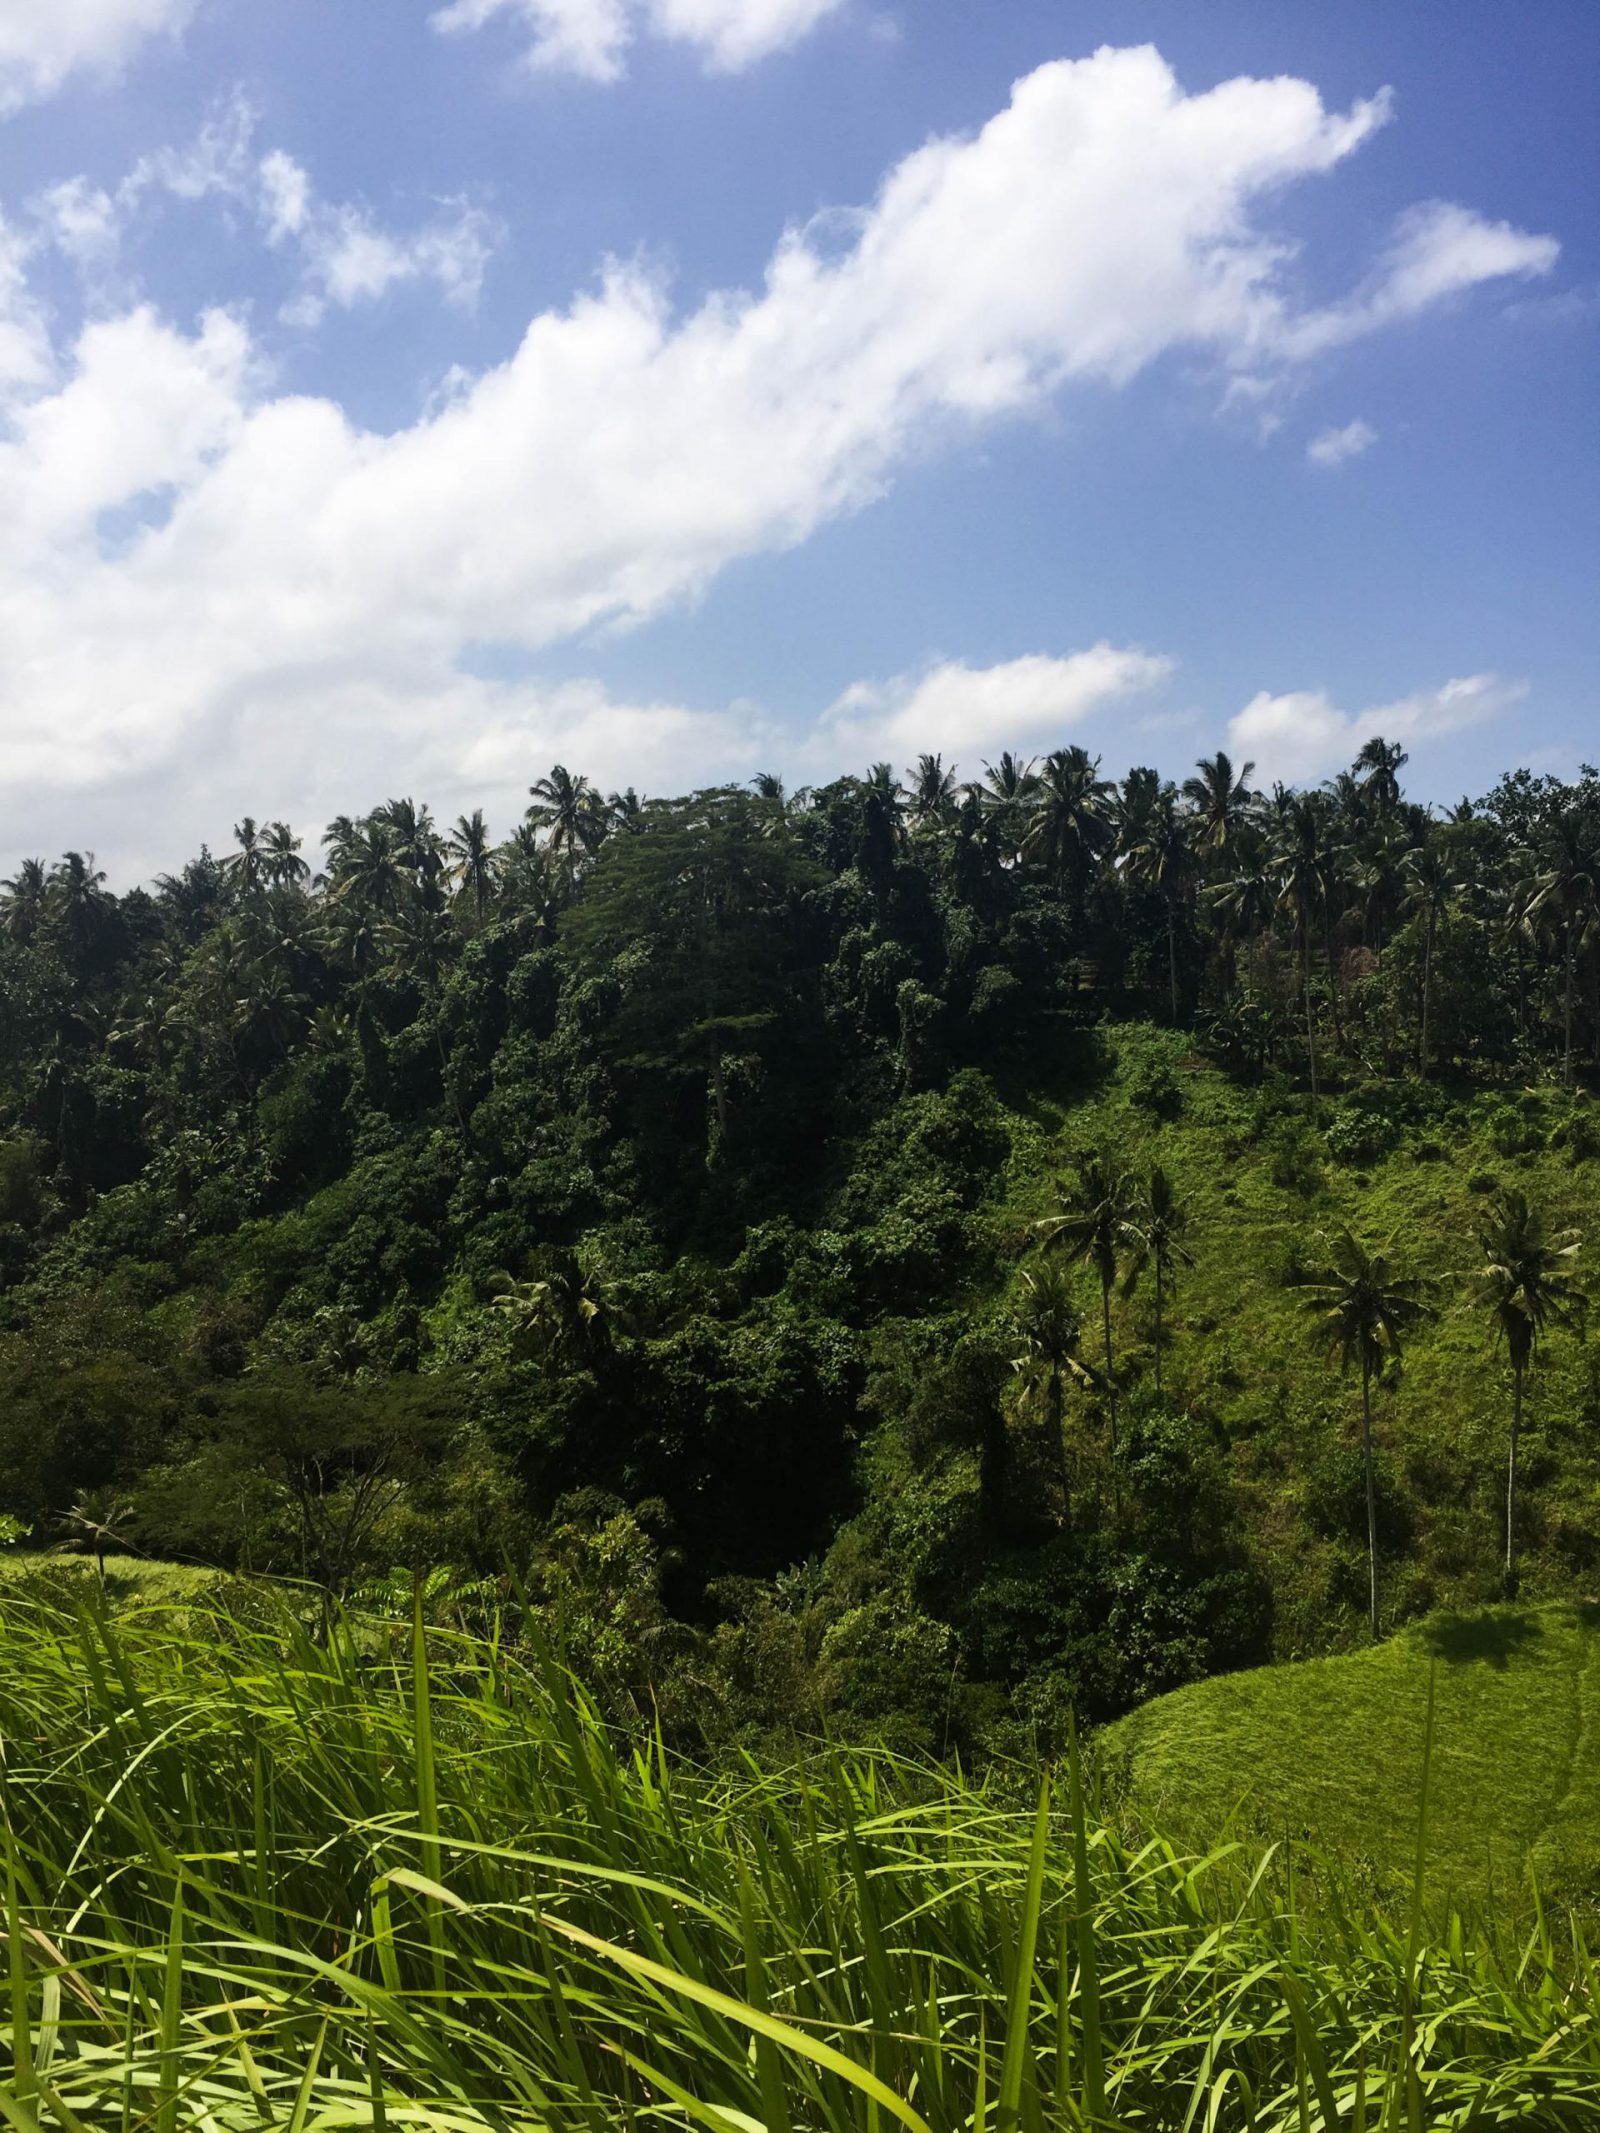 A Quick Guide To UBUD, Bali